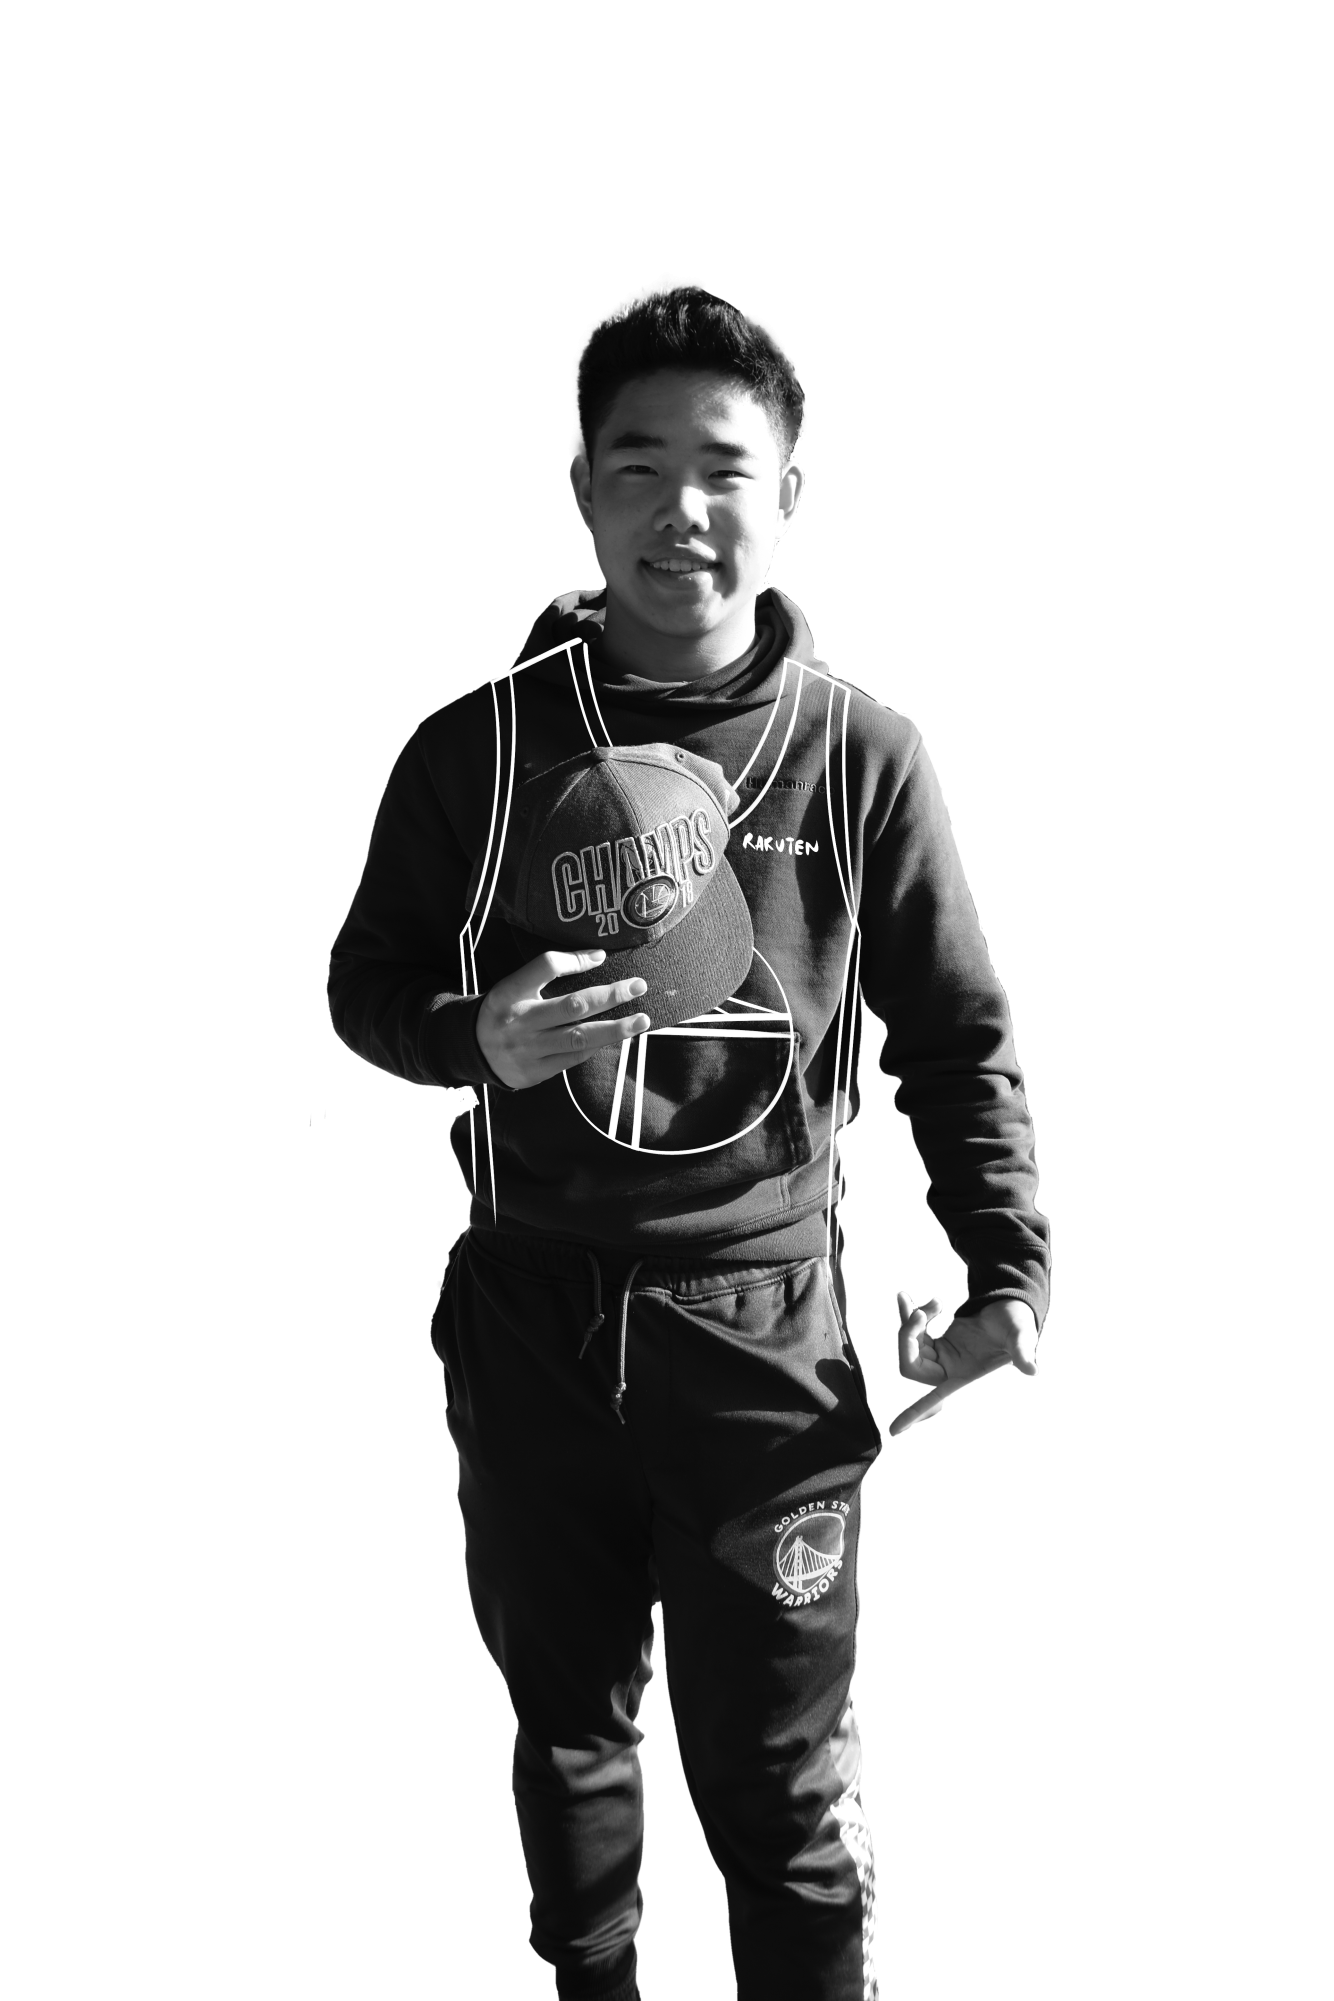 Sophomore Liam Wong: The Golden State Warriors